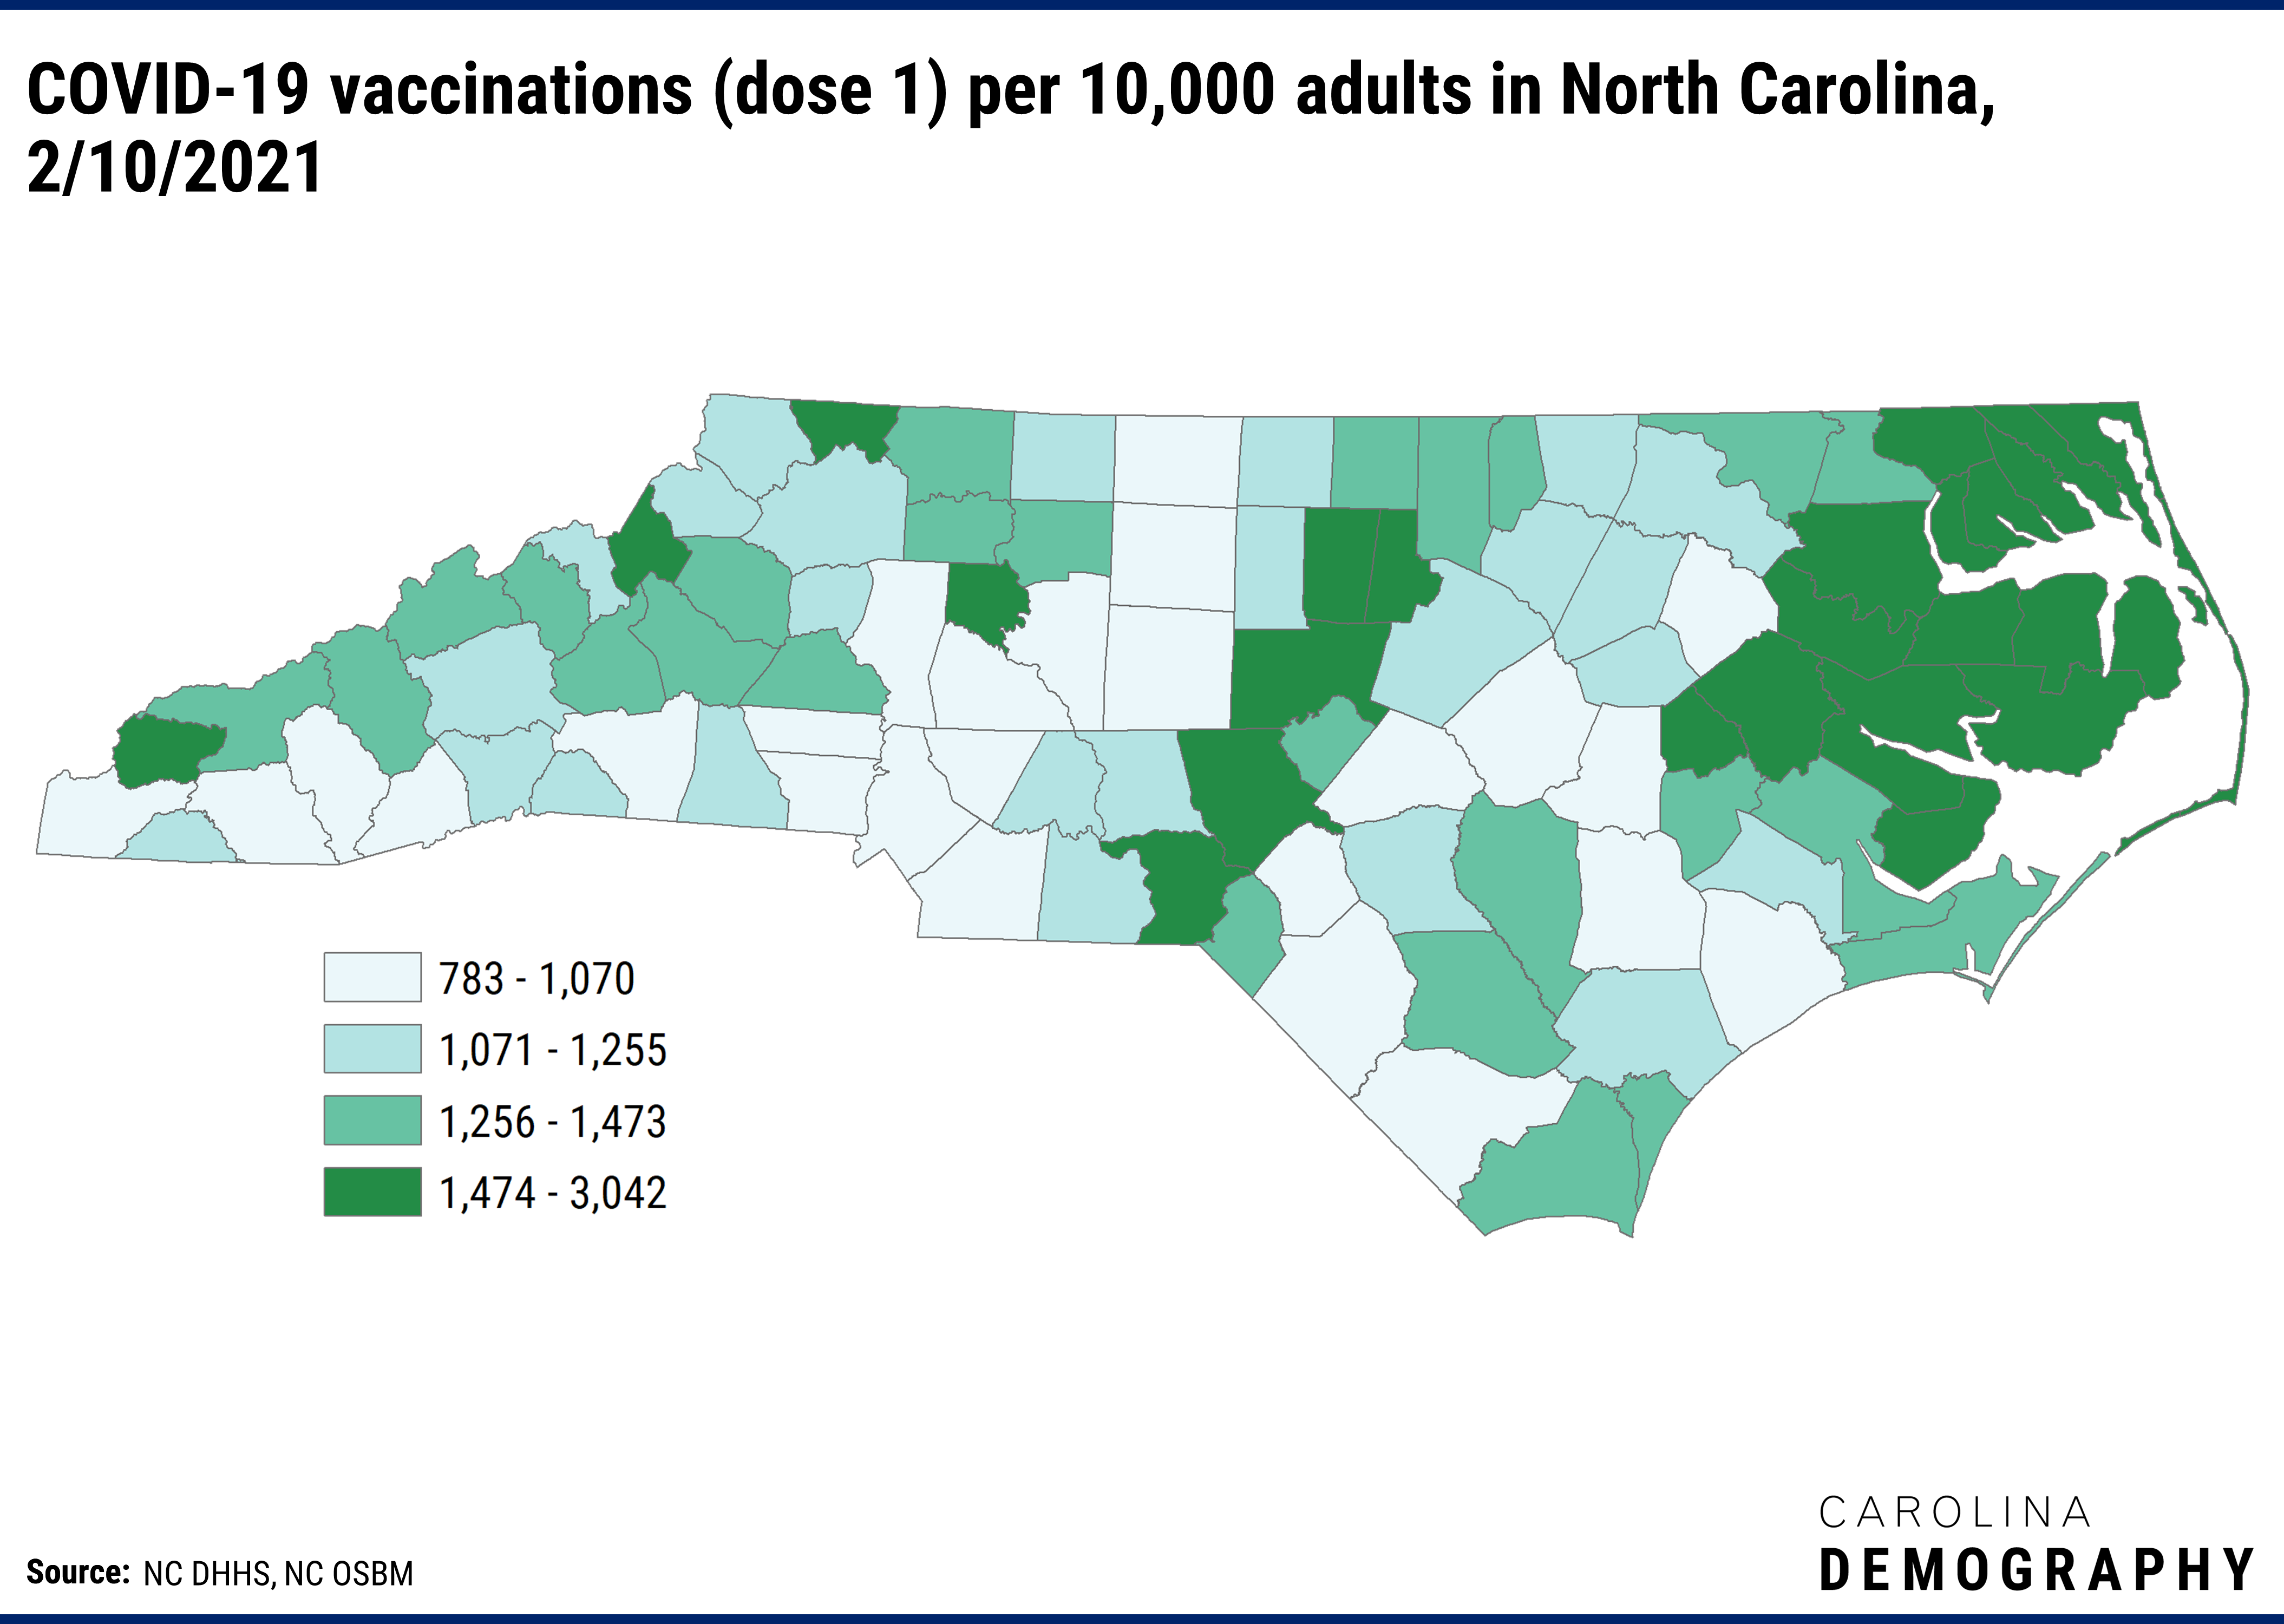 NC map showing COVID-19 vaccinations